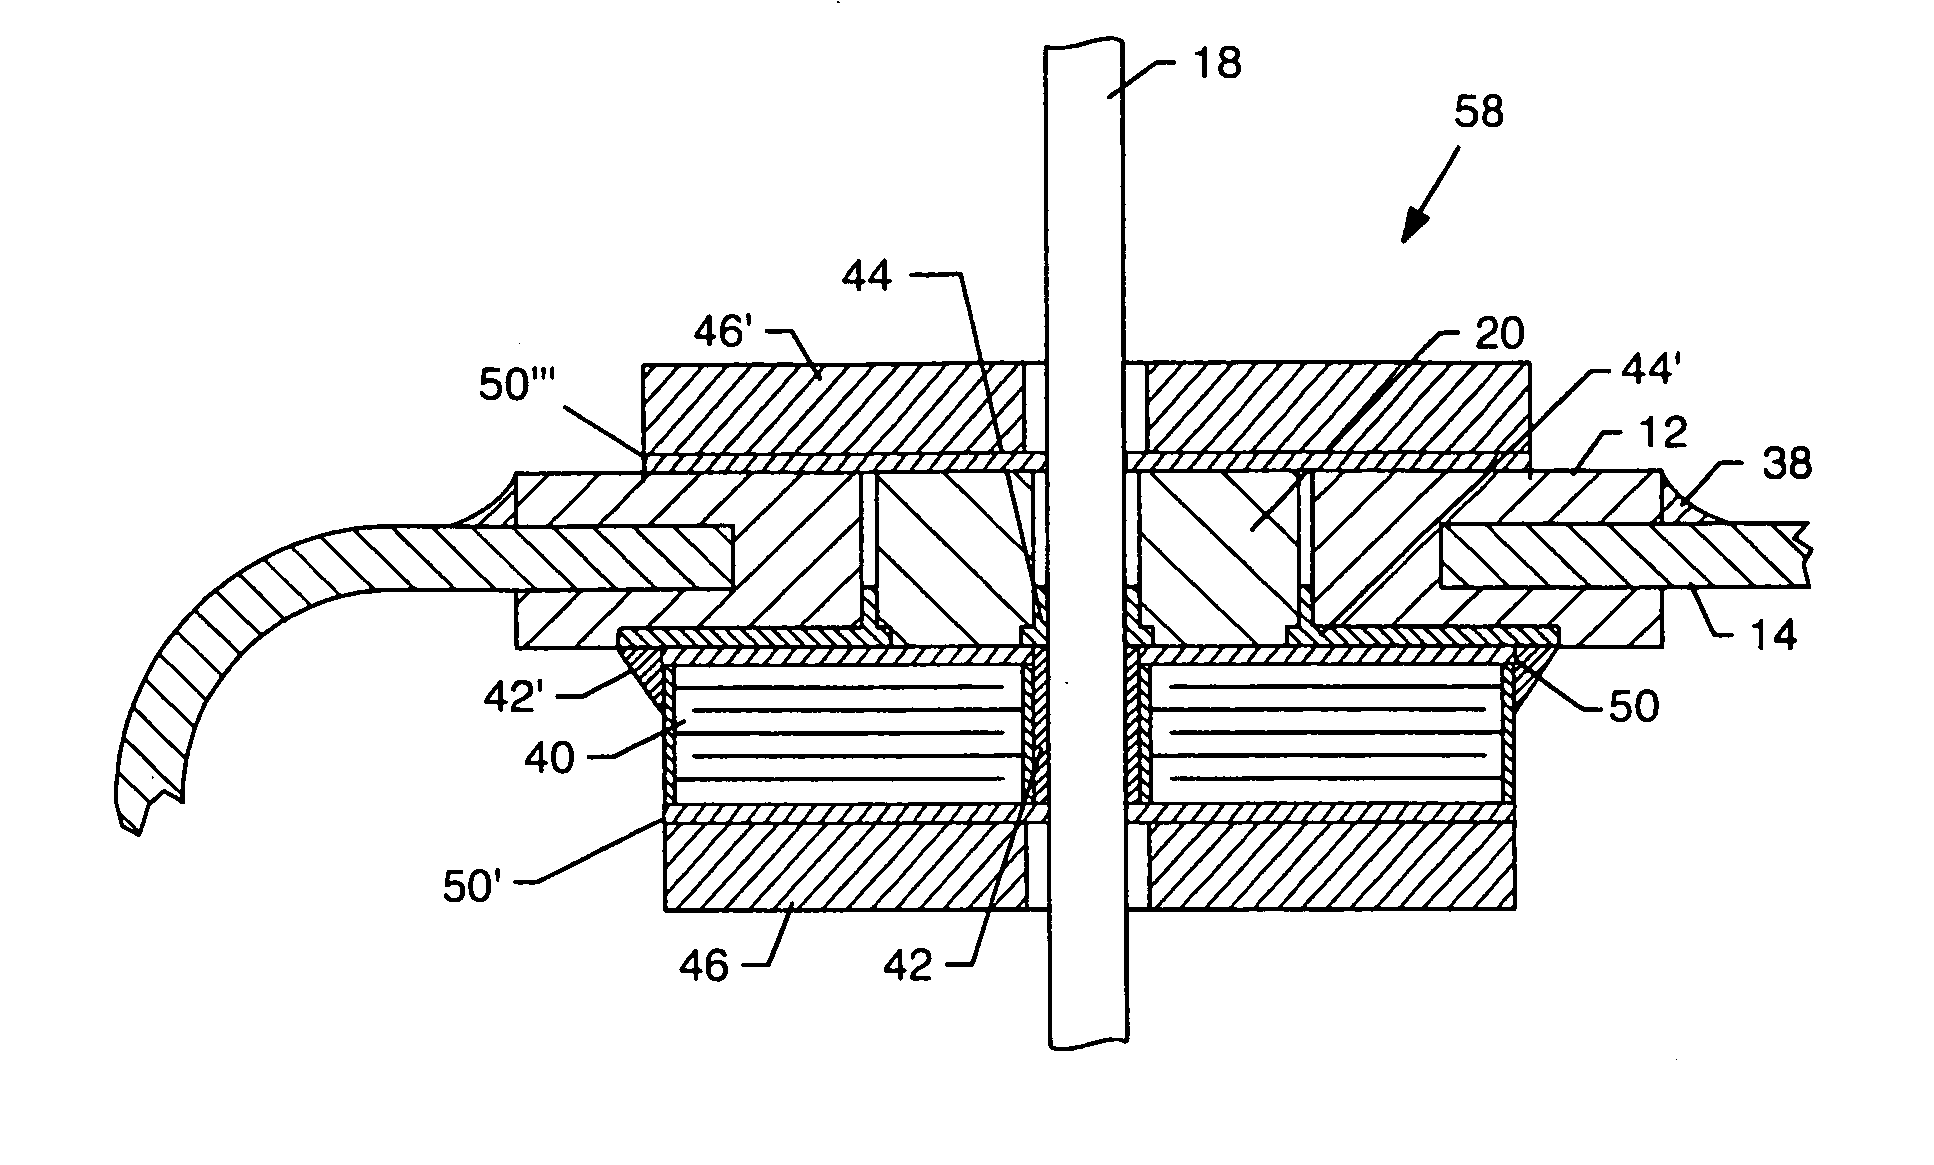 Inductor capacitor EMI filter for human implant applications